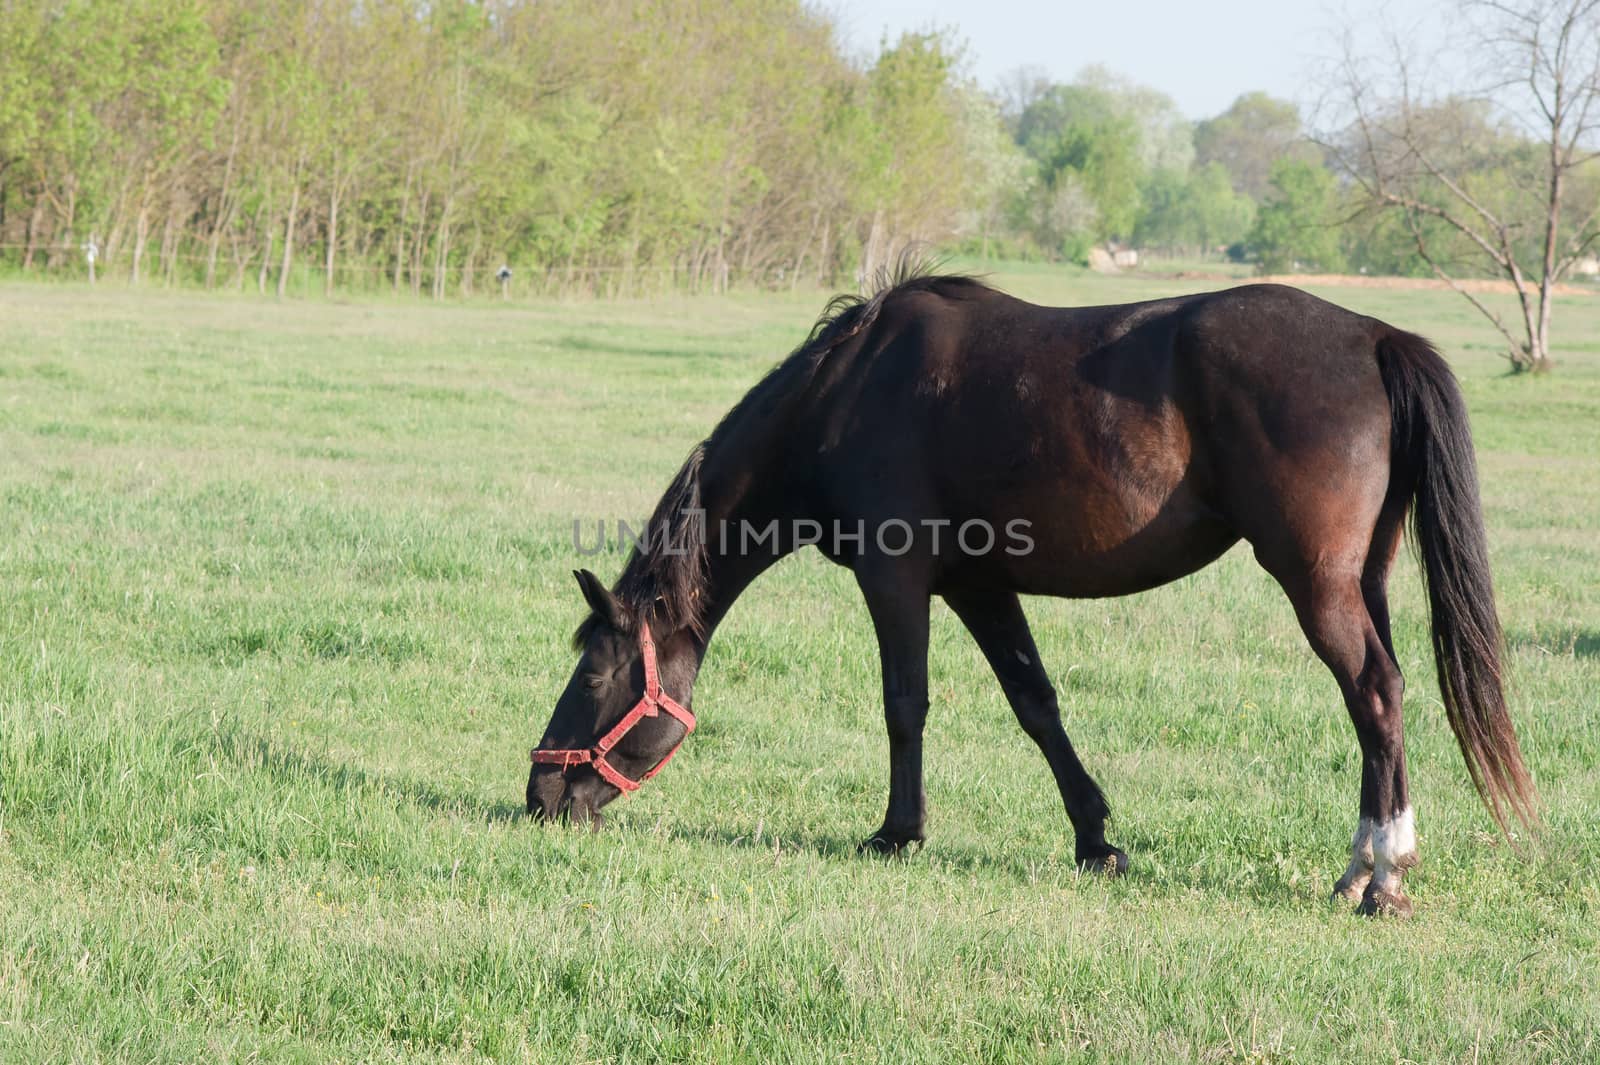 Horses graze freely on pasture in the spring.